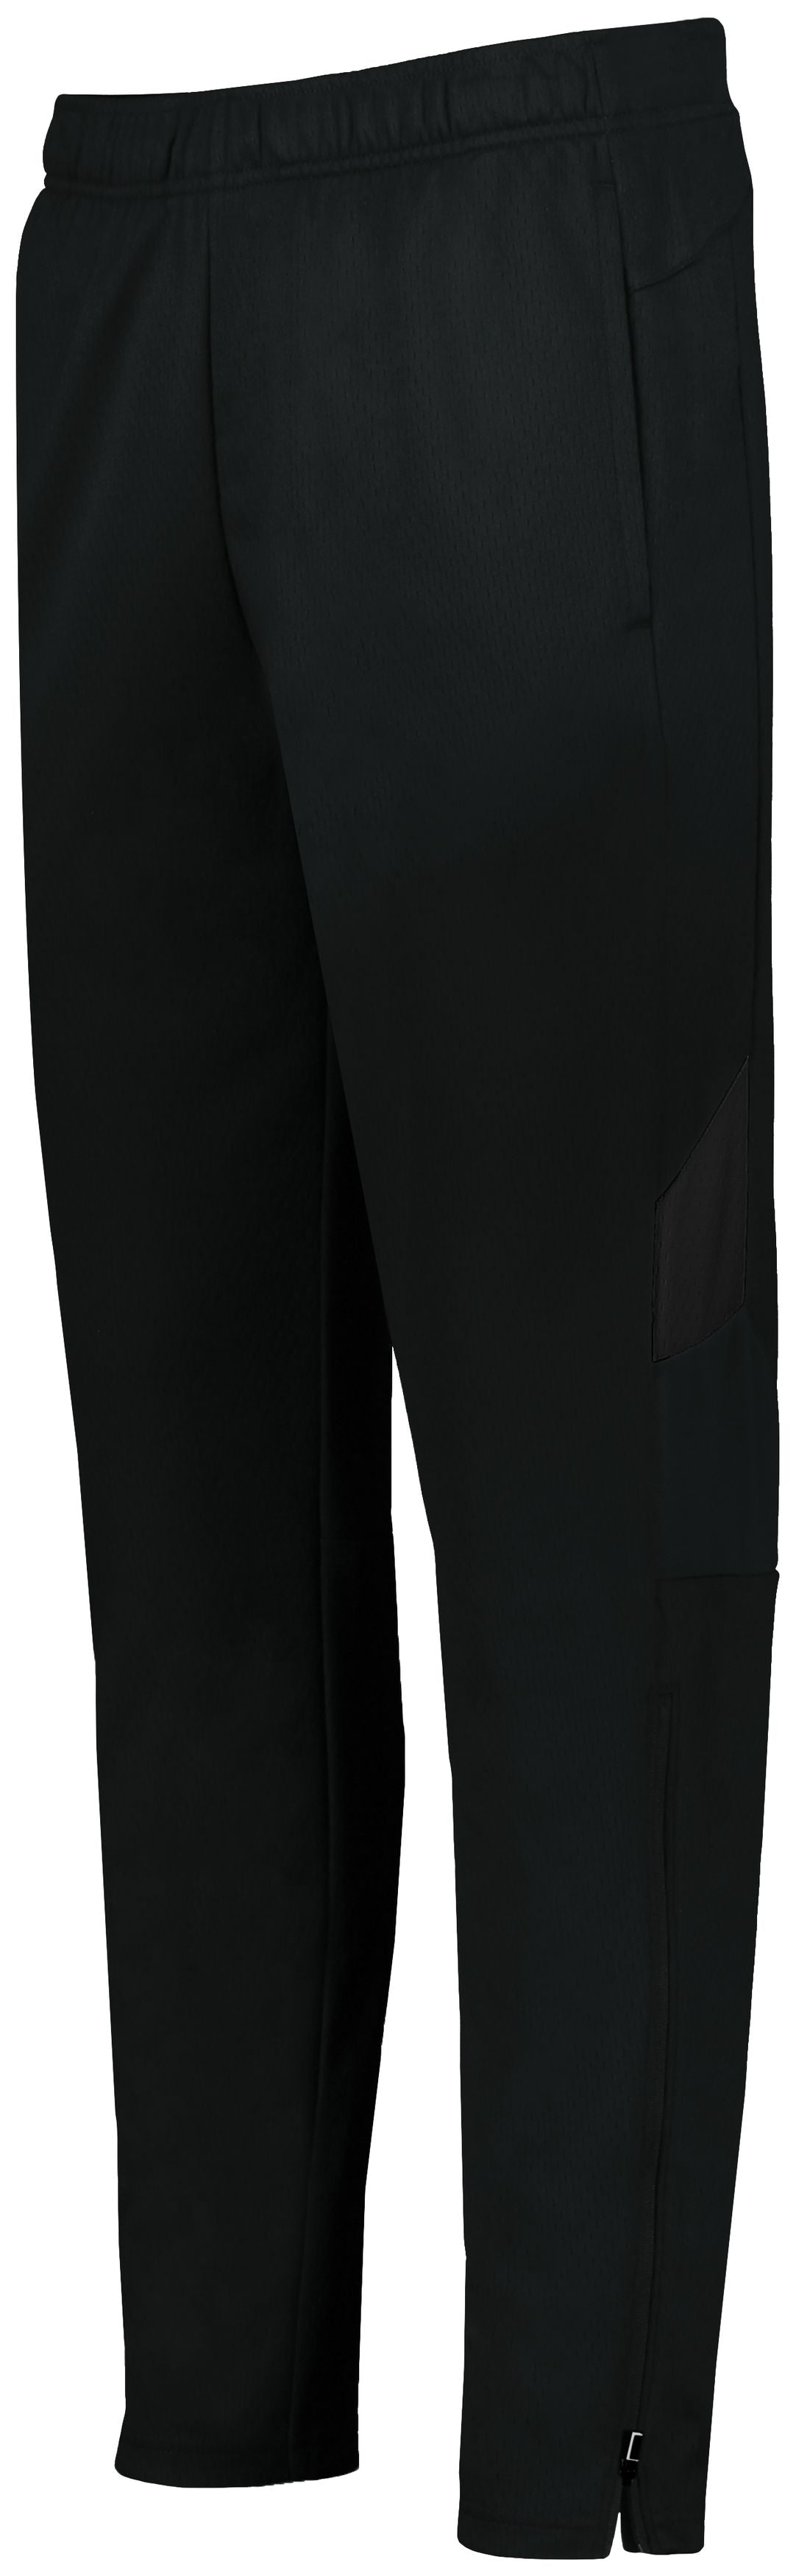 HOLLOWAY - YOUTH LIMITLESS PANT